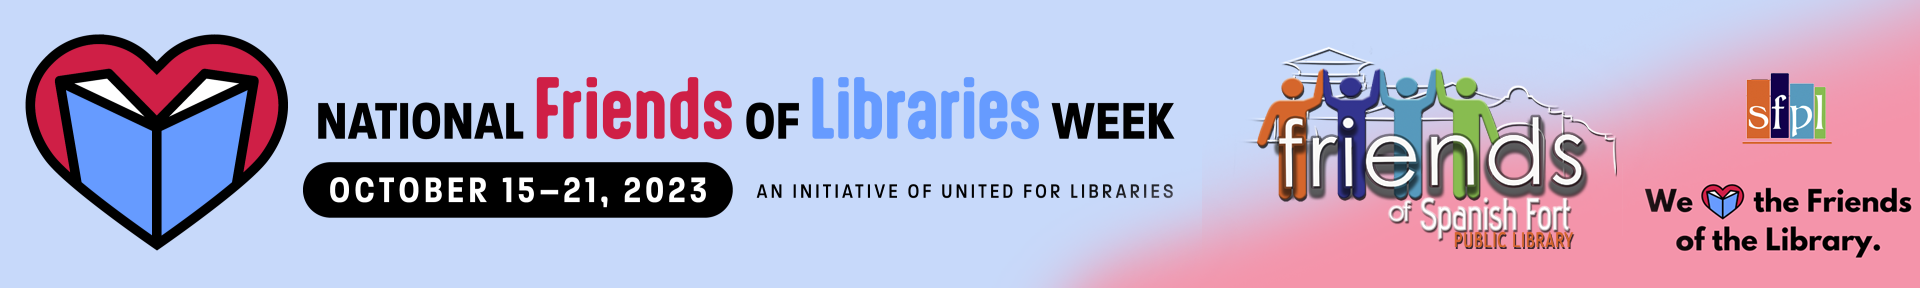 United for Libraries will coordinate the 18th annual National Friends of Libraries Week Oct. 15-21, 2023